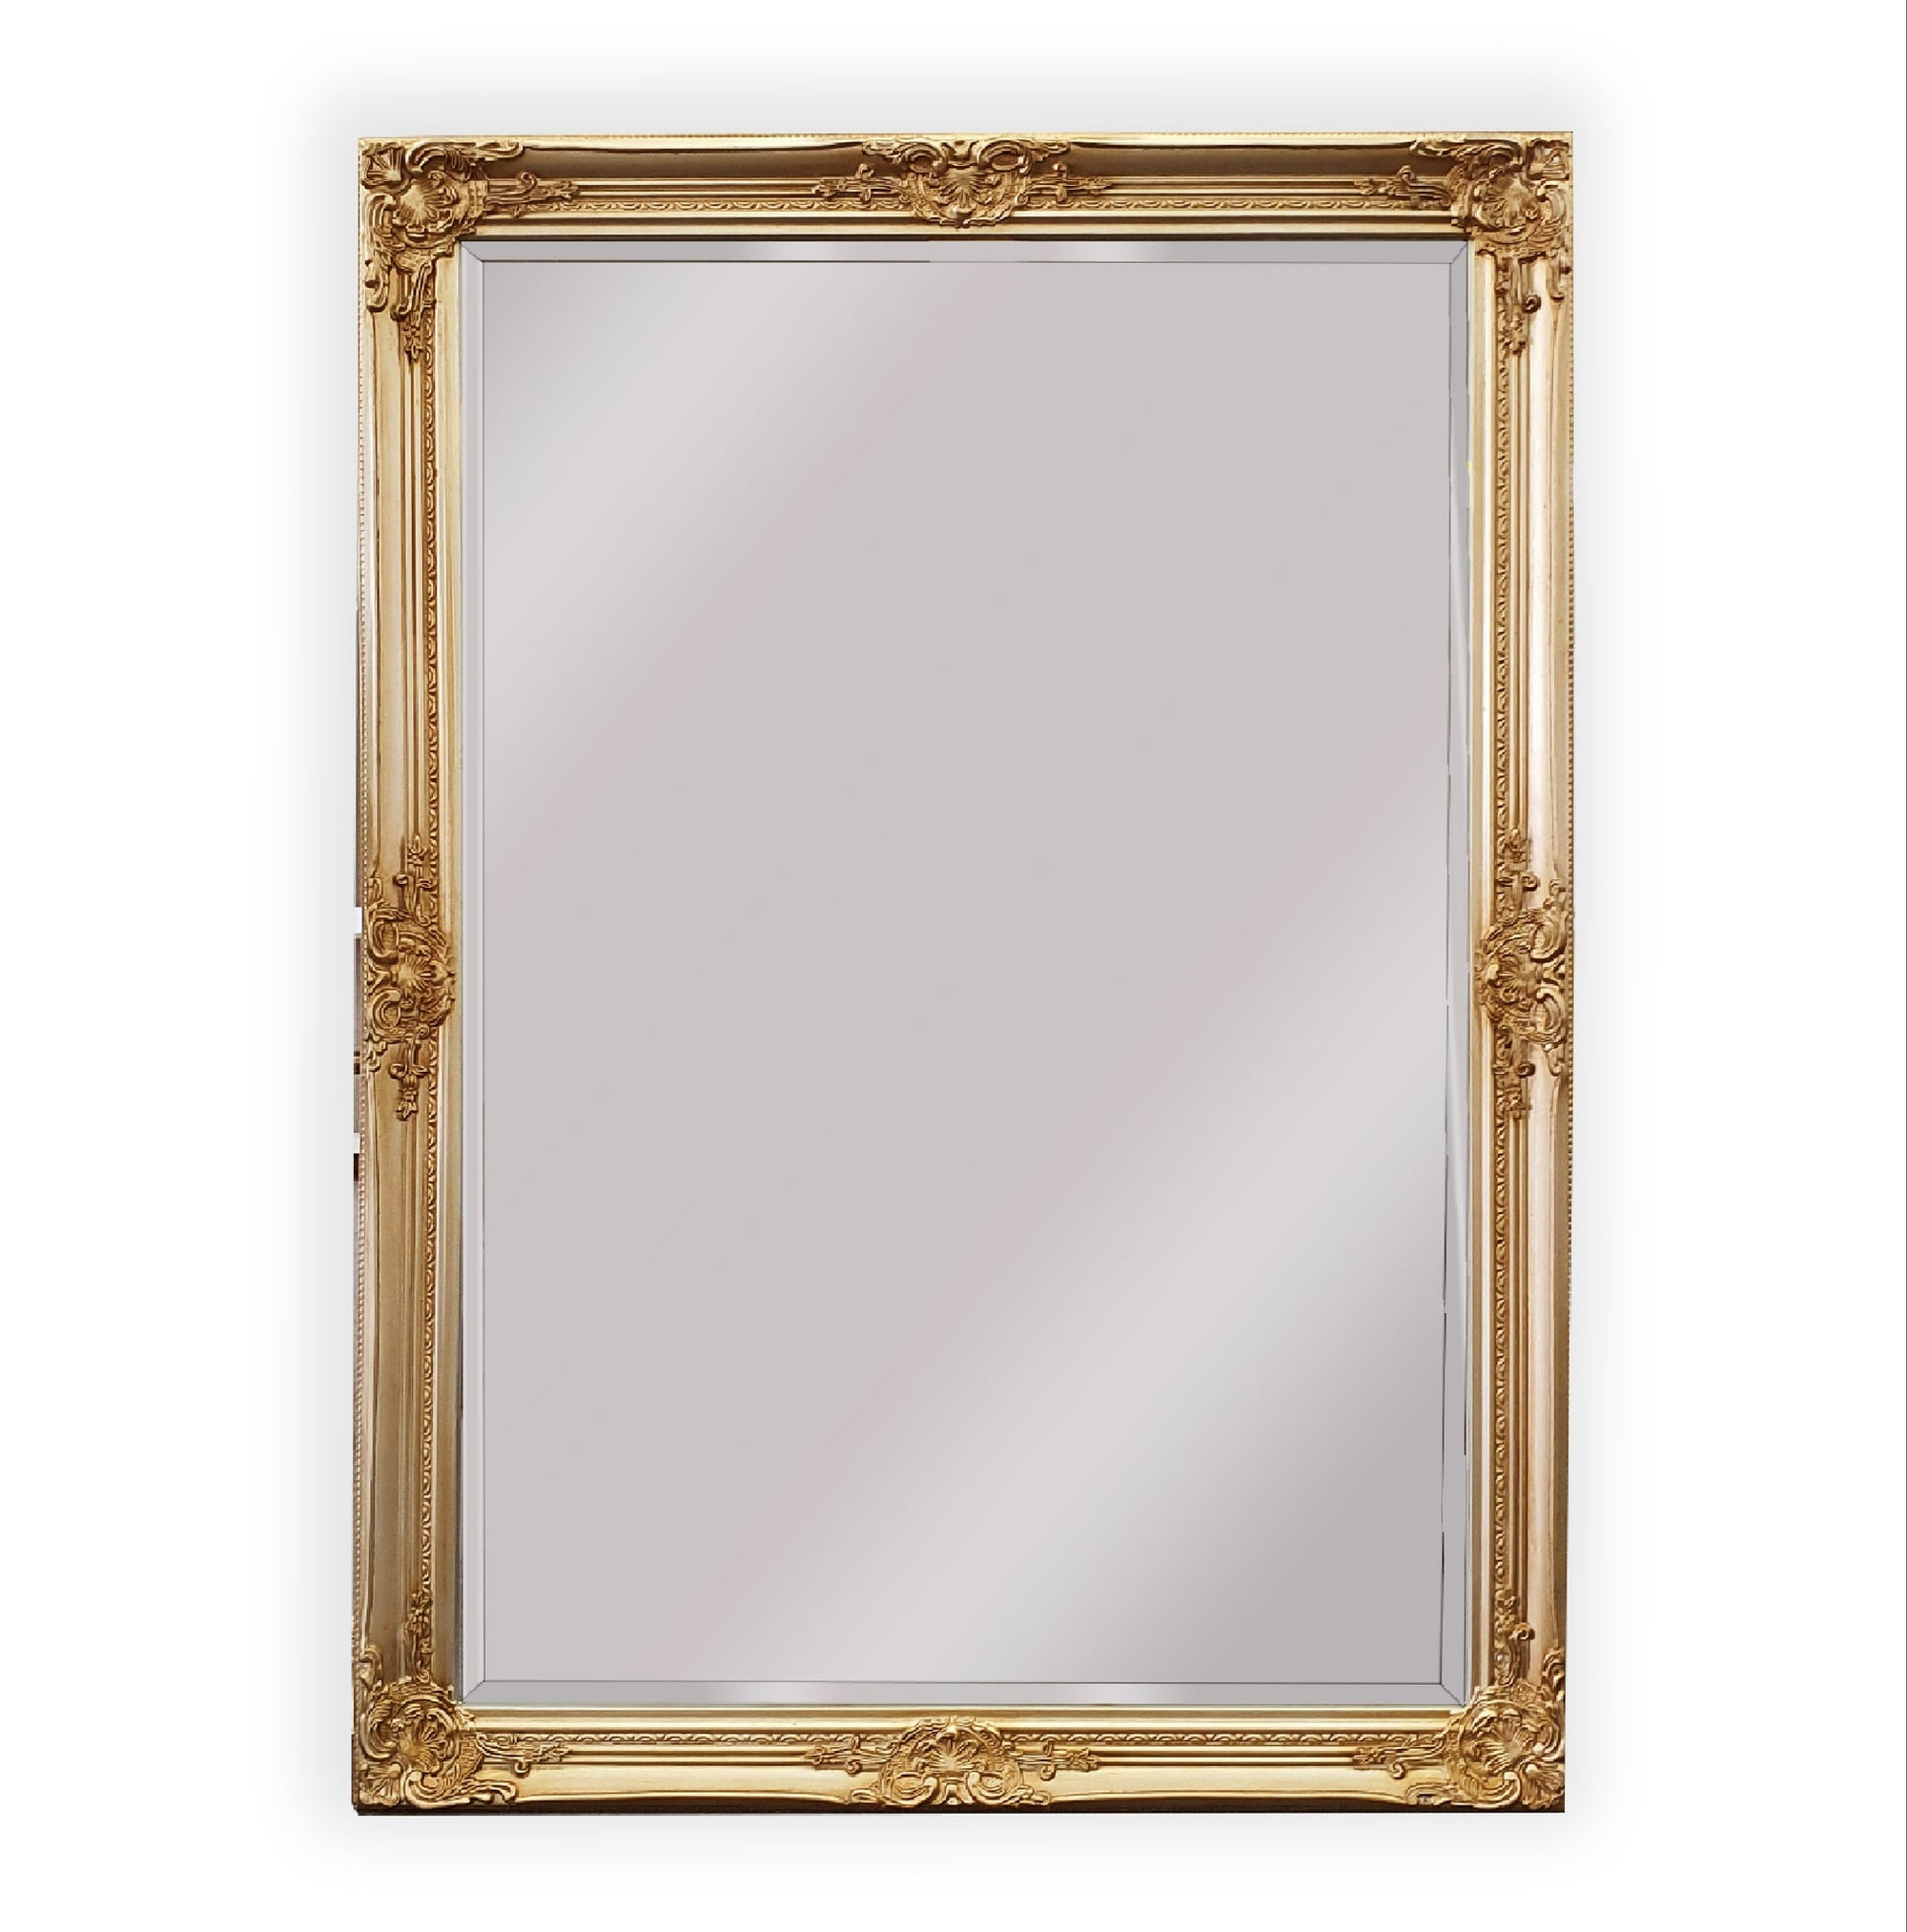 French Provincial Ornate Mirror - Country Gold - Small 80cm x 110cm